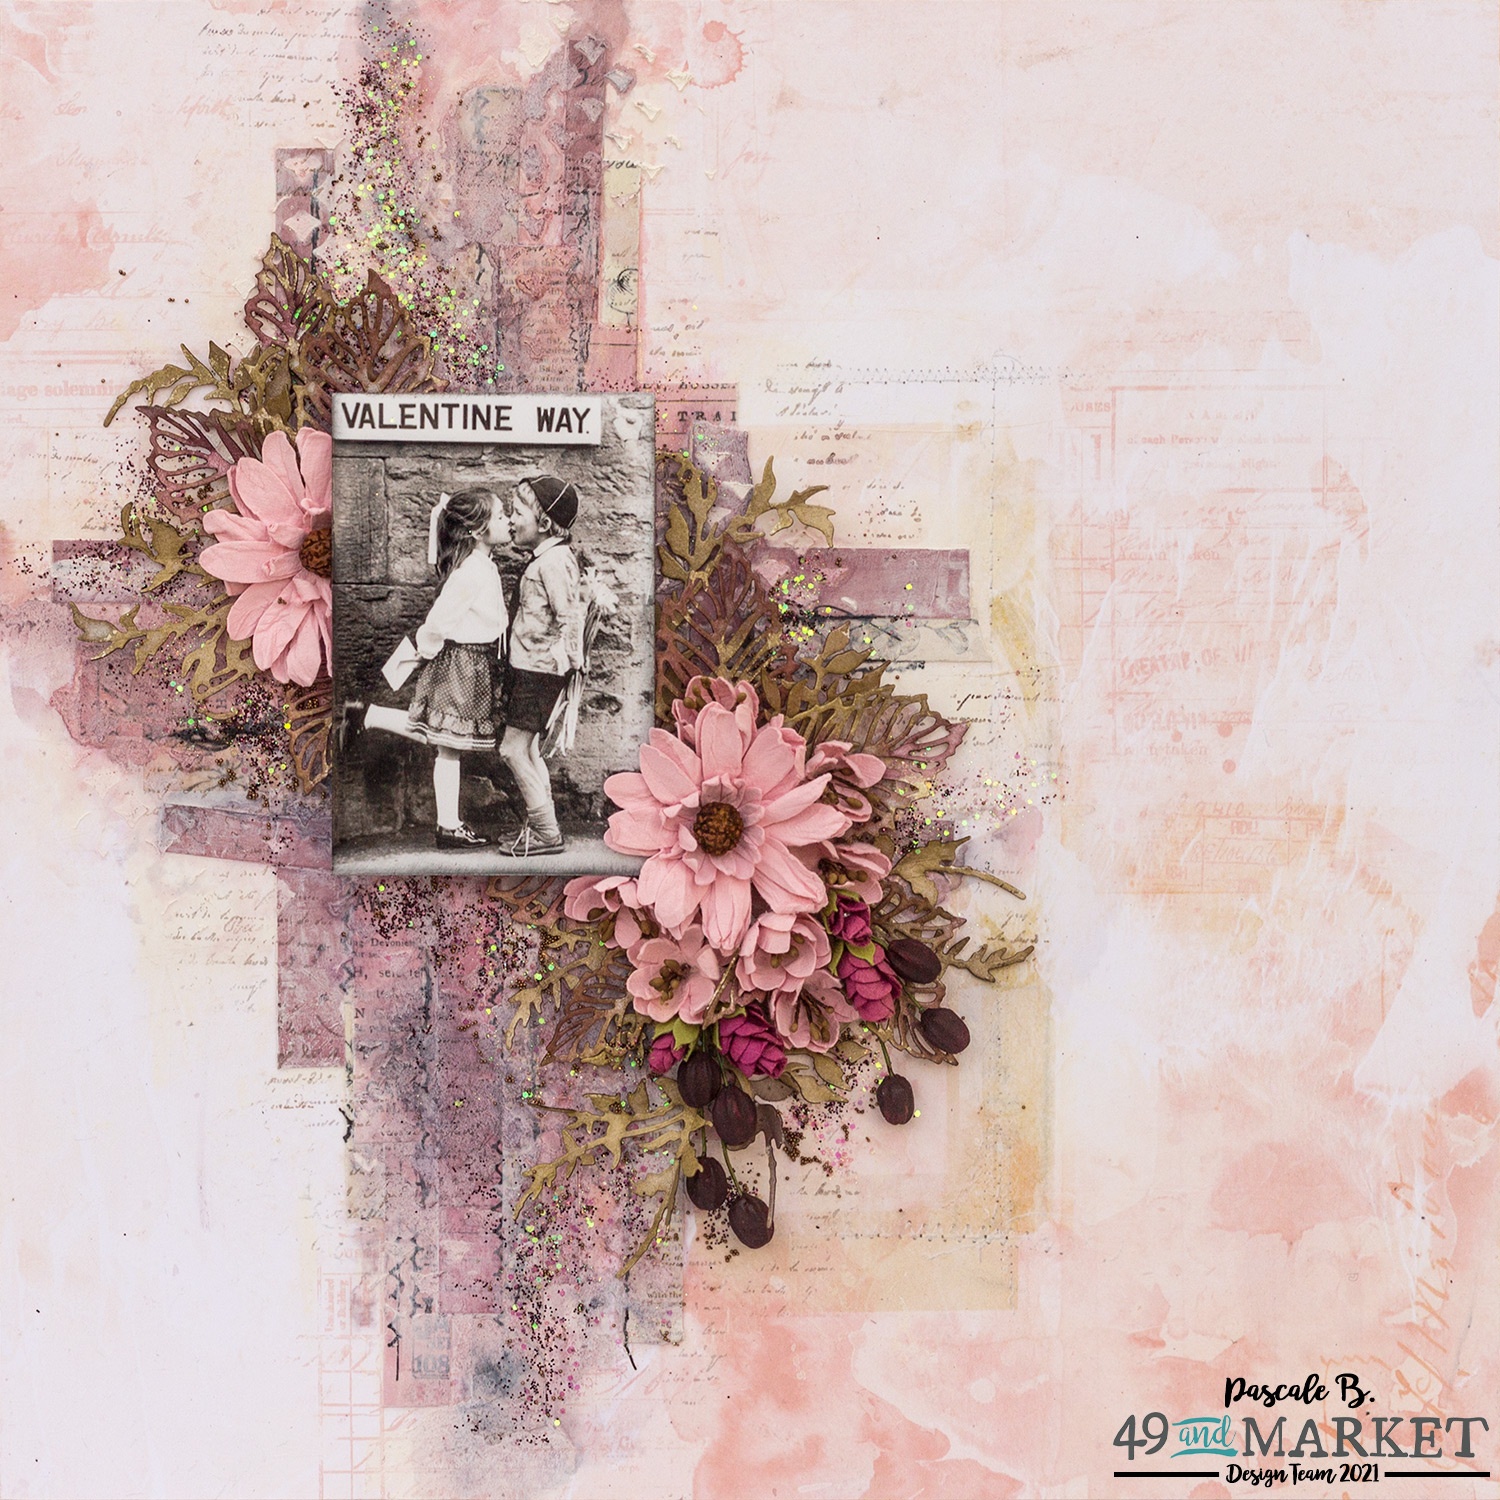 Valentine Way - Mixed media layout by Pascale B.